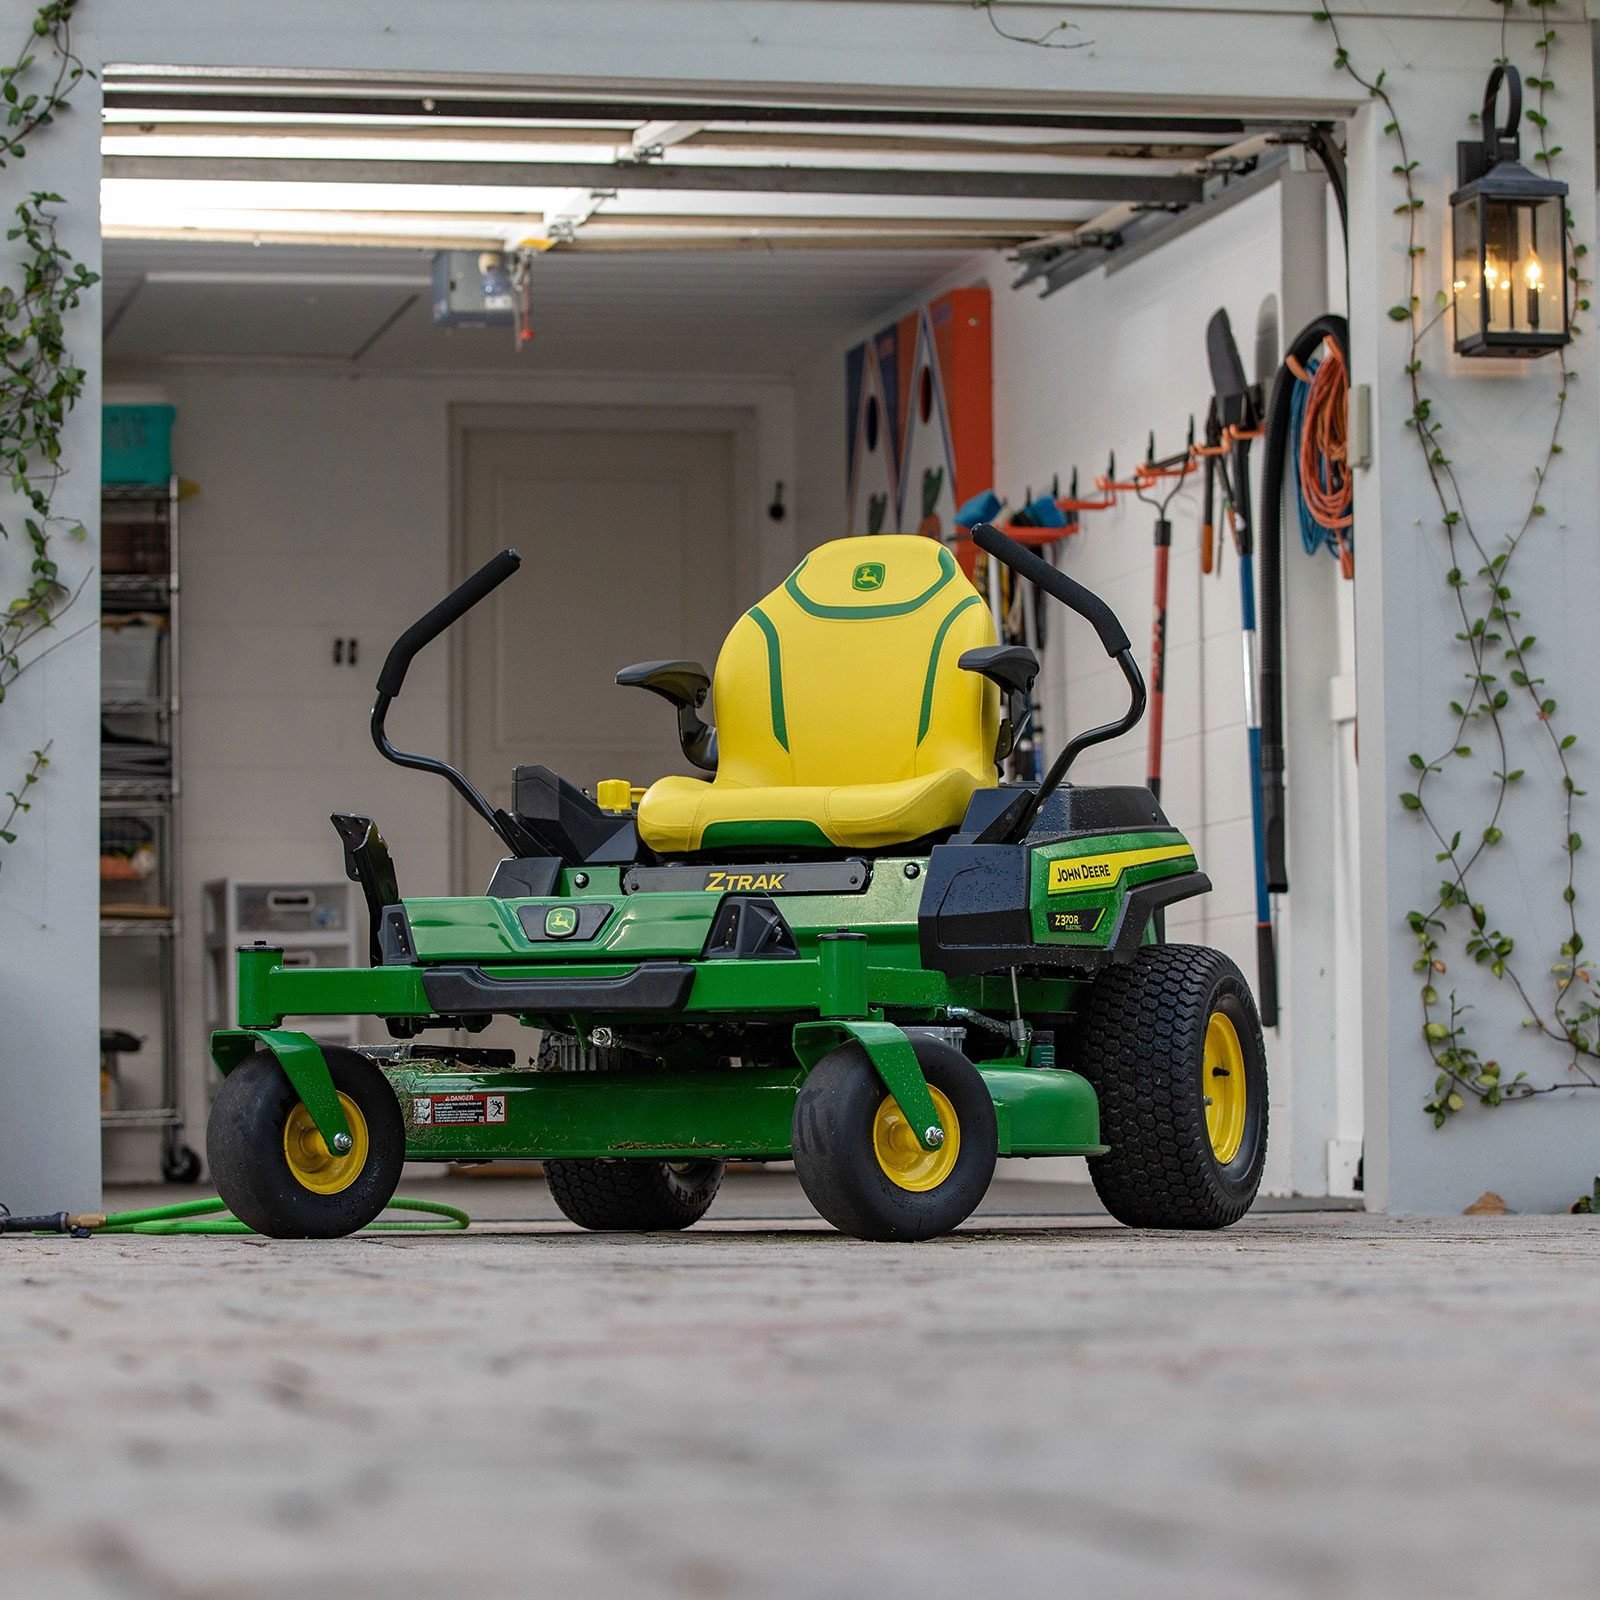 John Deere Releases New Z370R Electric Riding Lawn Mower